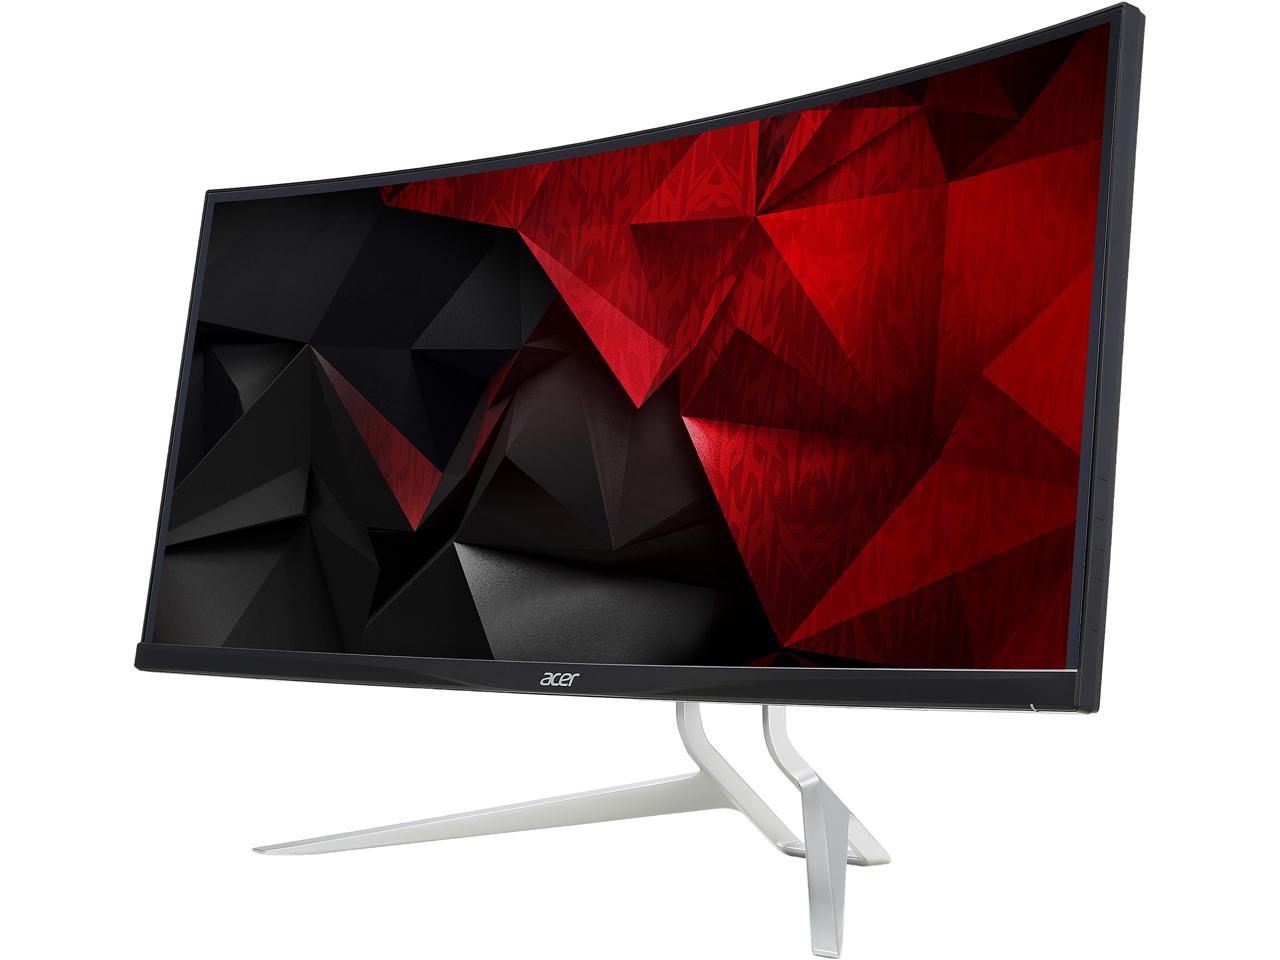 Acer XR342CK 34" UltraWide 21:9 IPS 3440 x 1440 Curved LED Monitor 1ms (MPRT) HDR Ready AMD FreeSync Gaming Height Adjustable Swivel VESA